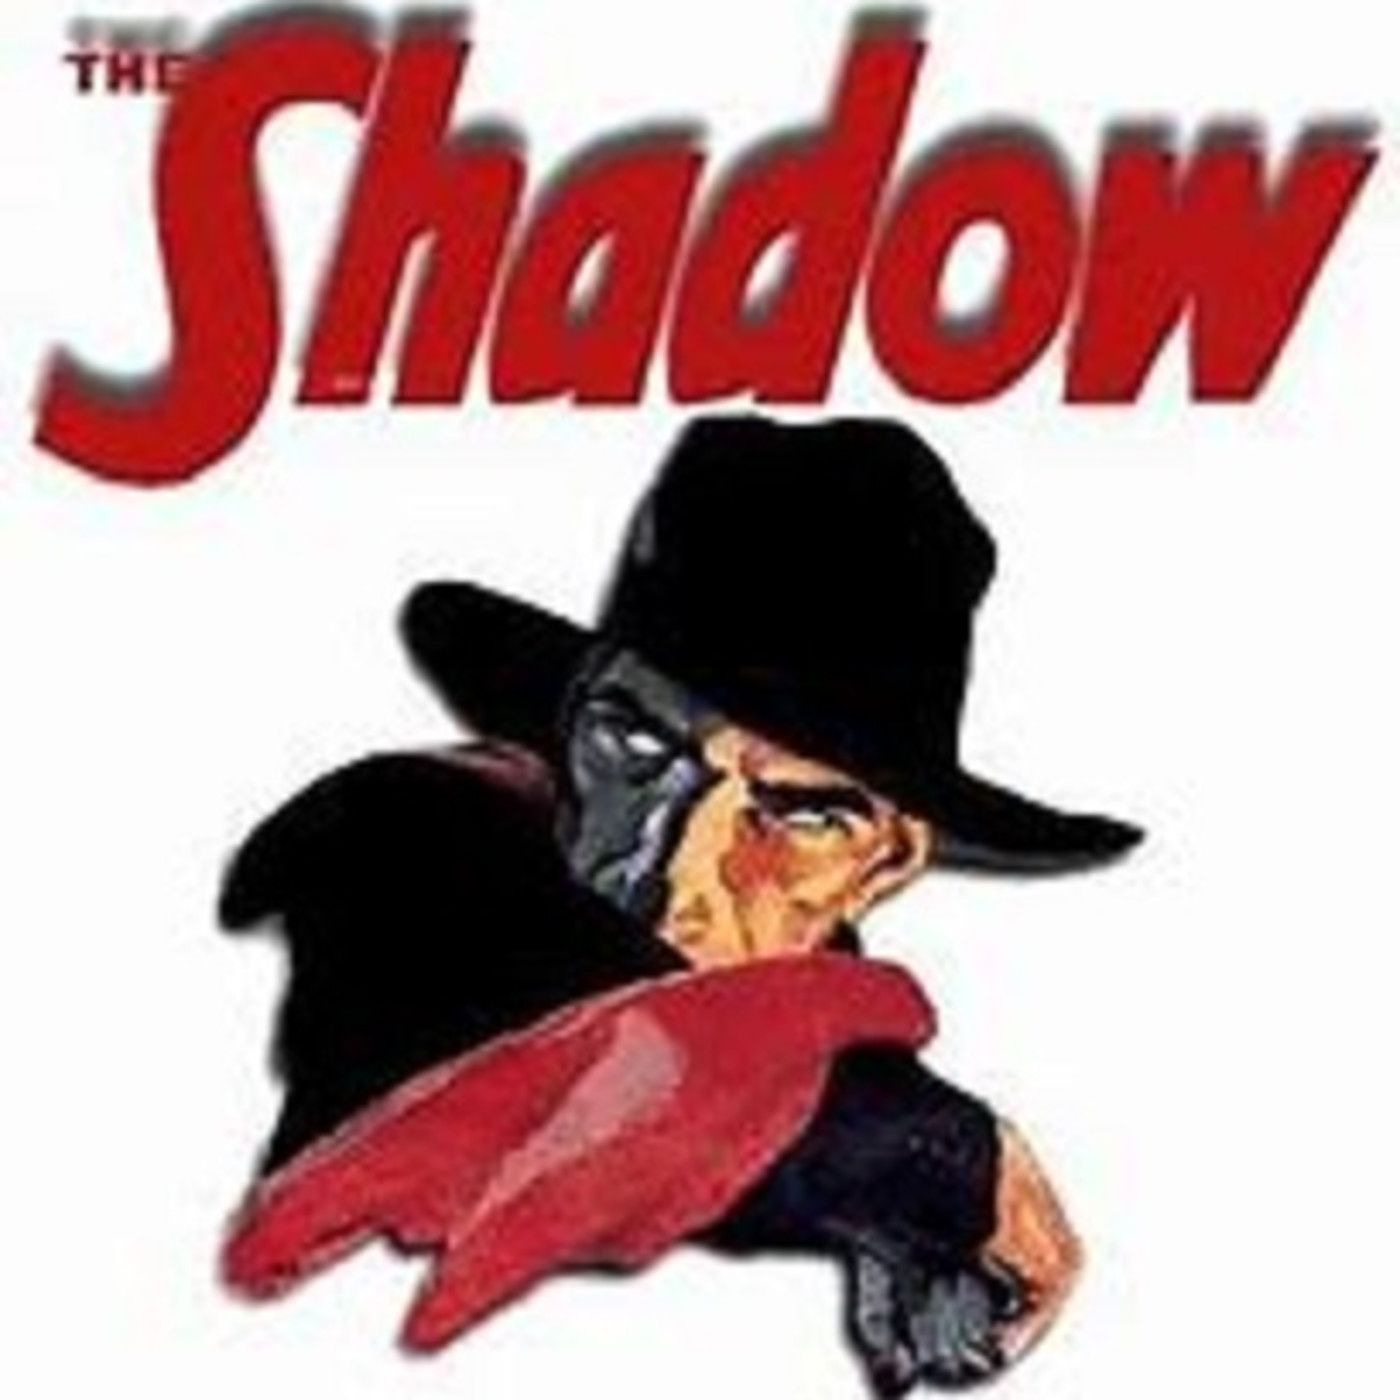 1940-1208 - The Voice of Death - 00 - The Shadow